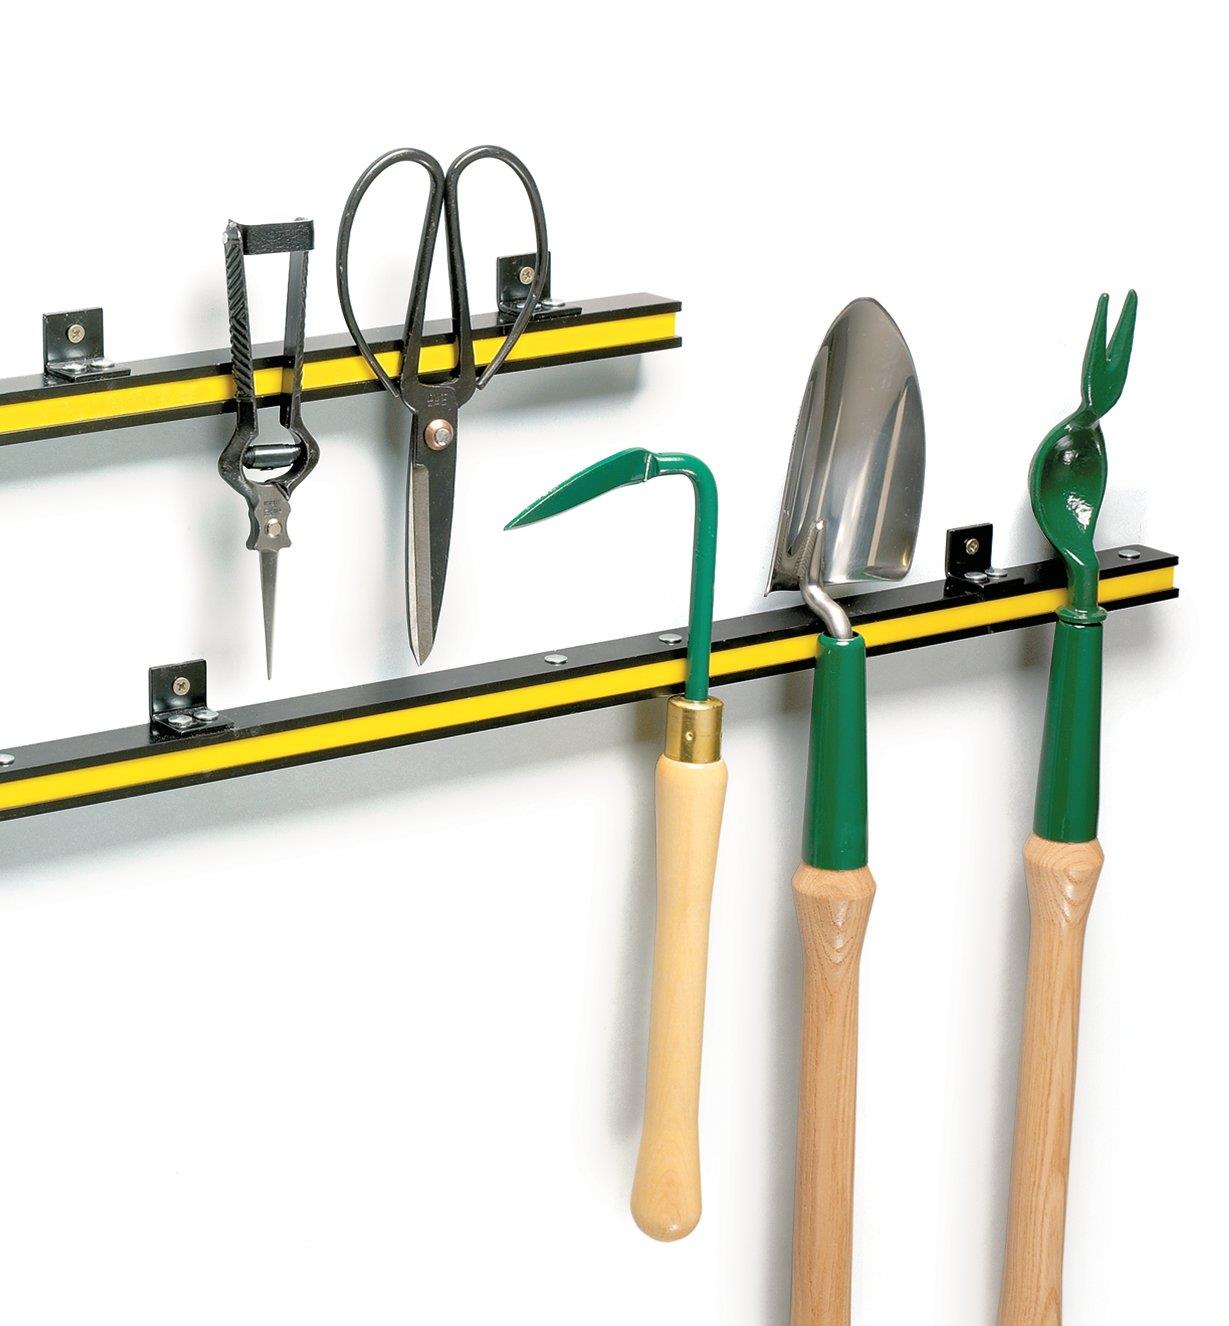 Both sizes of tool bar attached to a wall, with various garden tools clinging to them